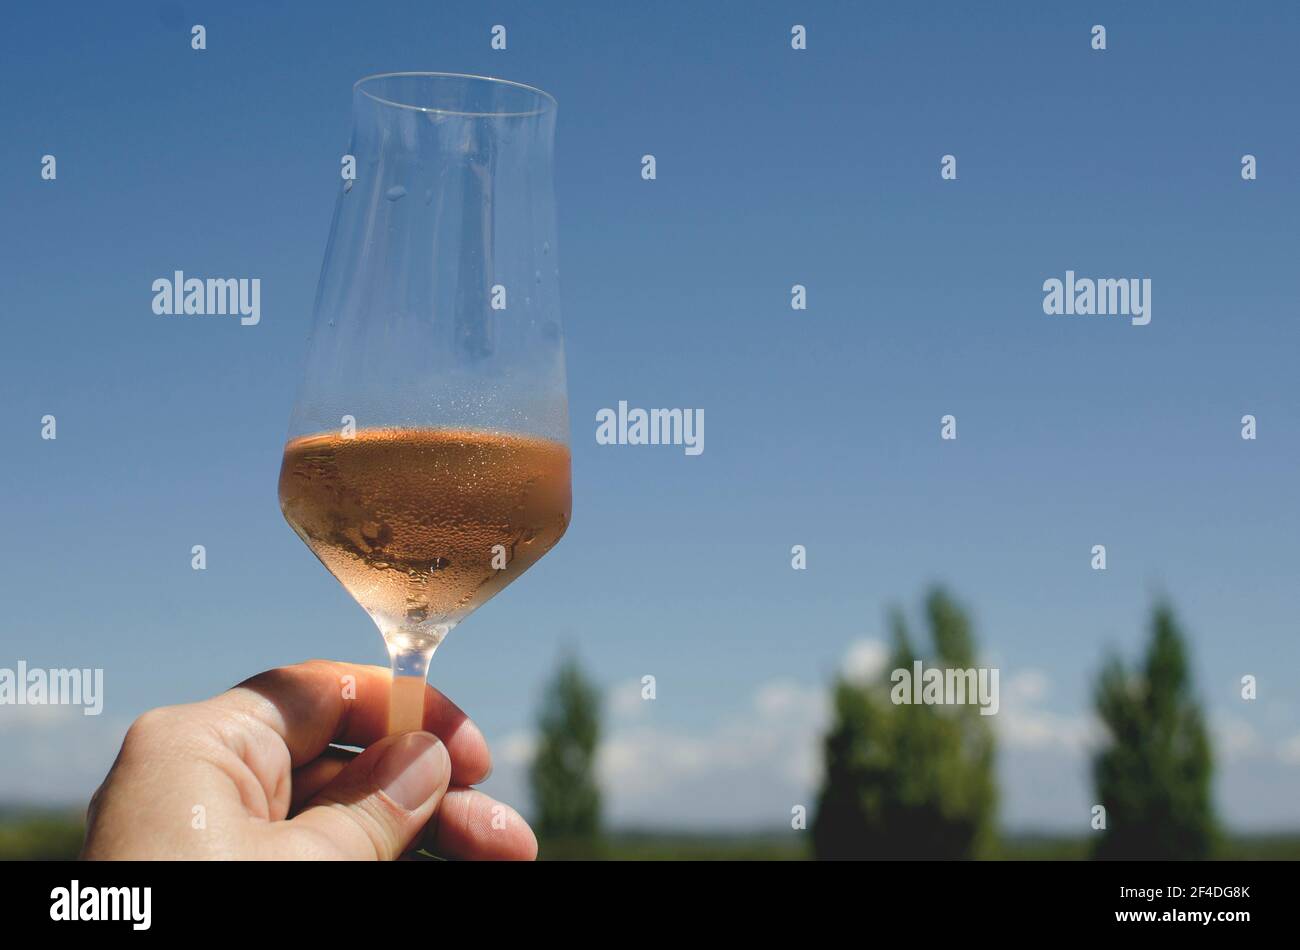 Woman holding a glass of rose champagne against a blue sky, Mendoza, Argentina Stock Photo